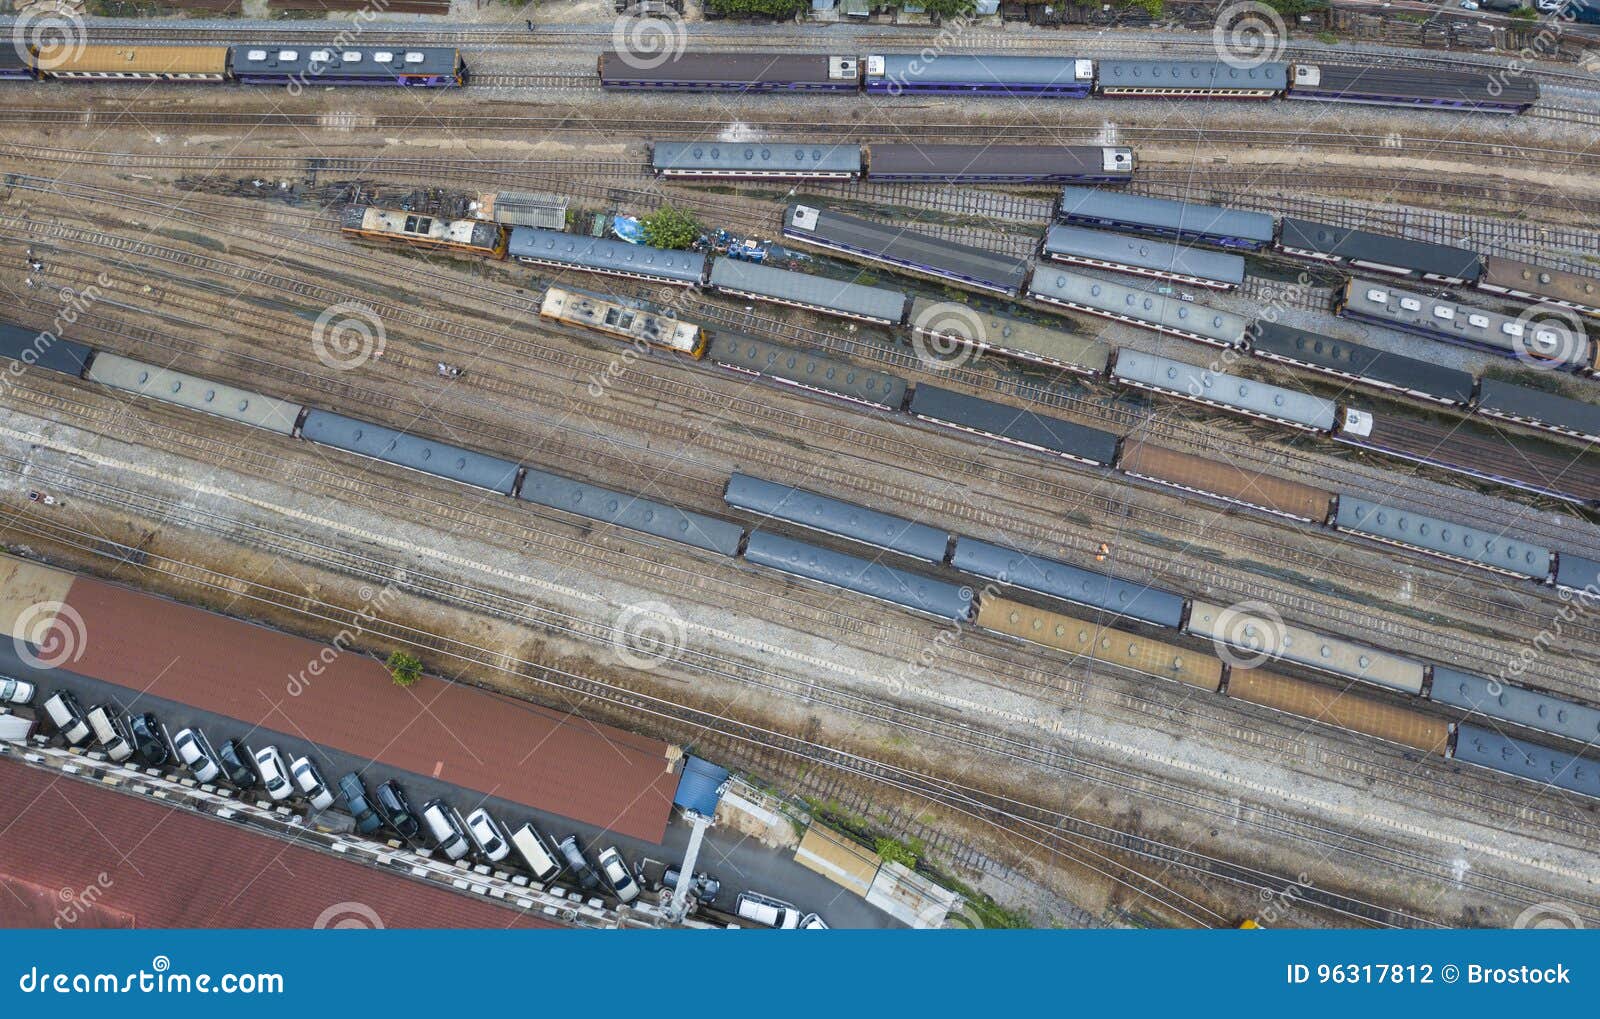 Top View of Trains Moving on Railroad Stock Photo - Image of shipping ...